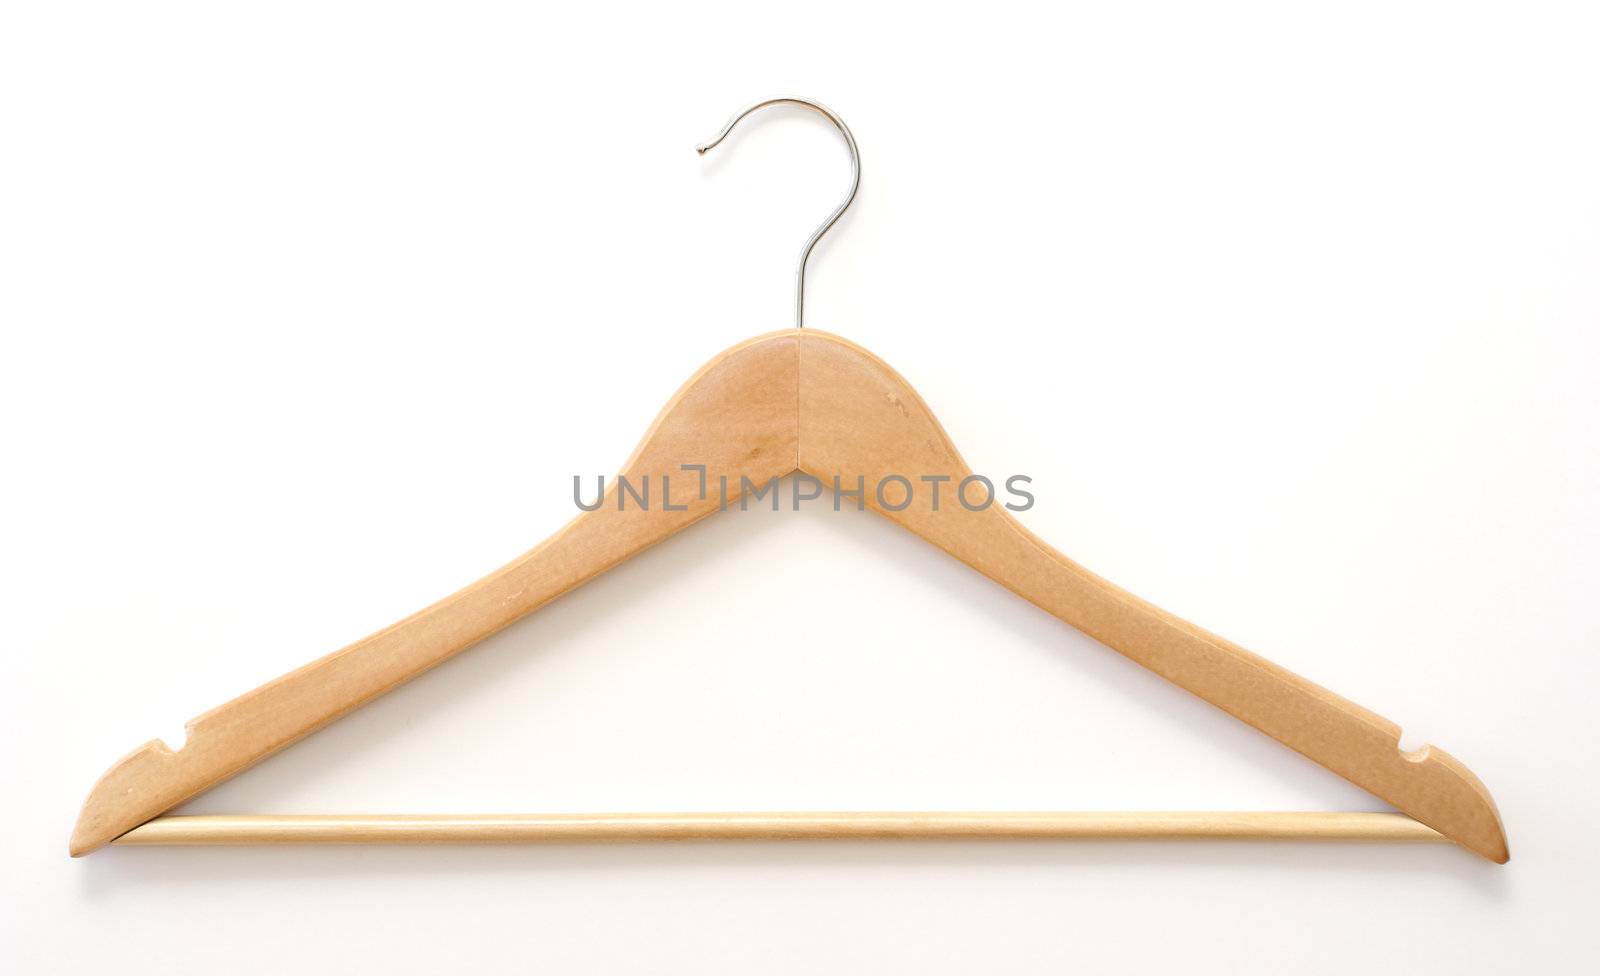 A wooden hanger on a white background.